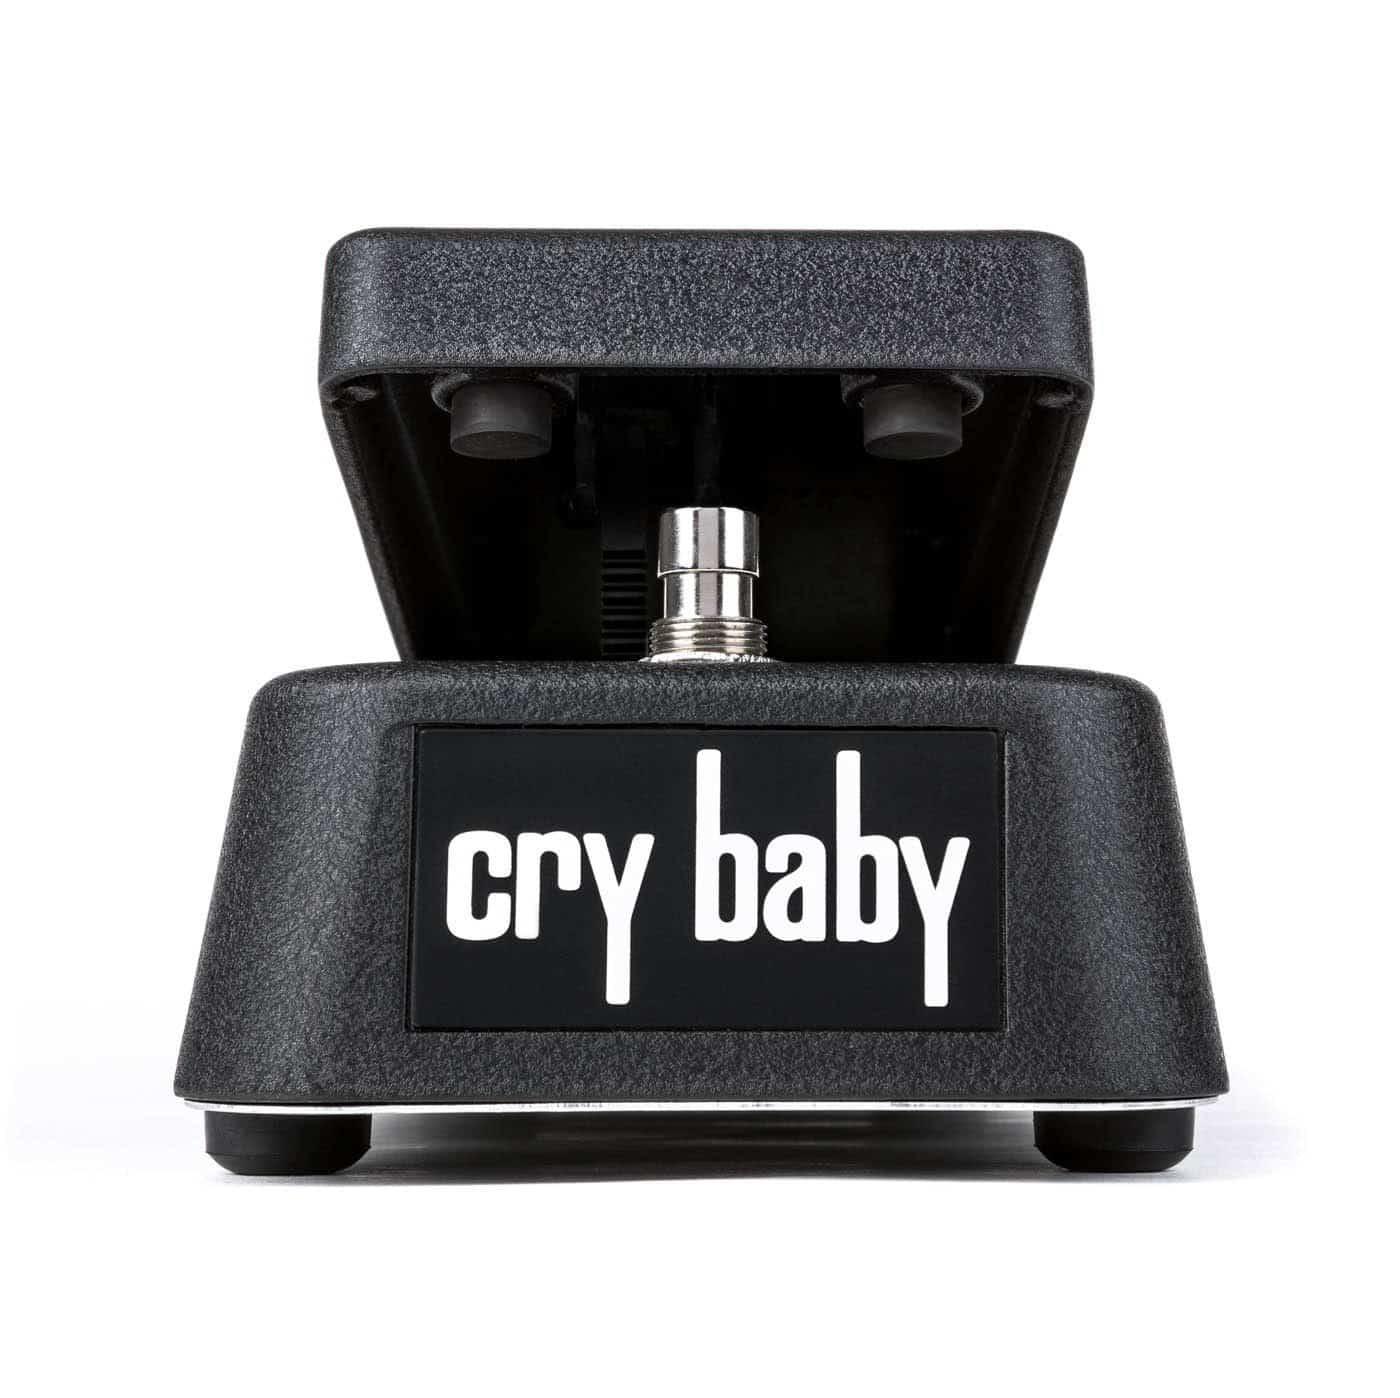 CB-95 Crybaby Original Wah Pedal - Guitar - Effects Pedals by Jim Dunlop at Muso's Stuff